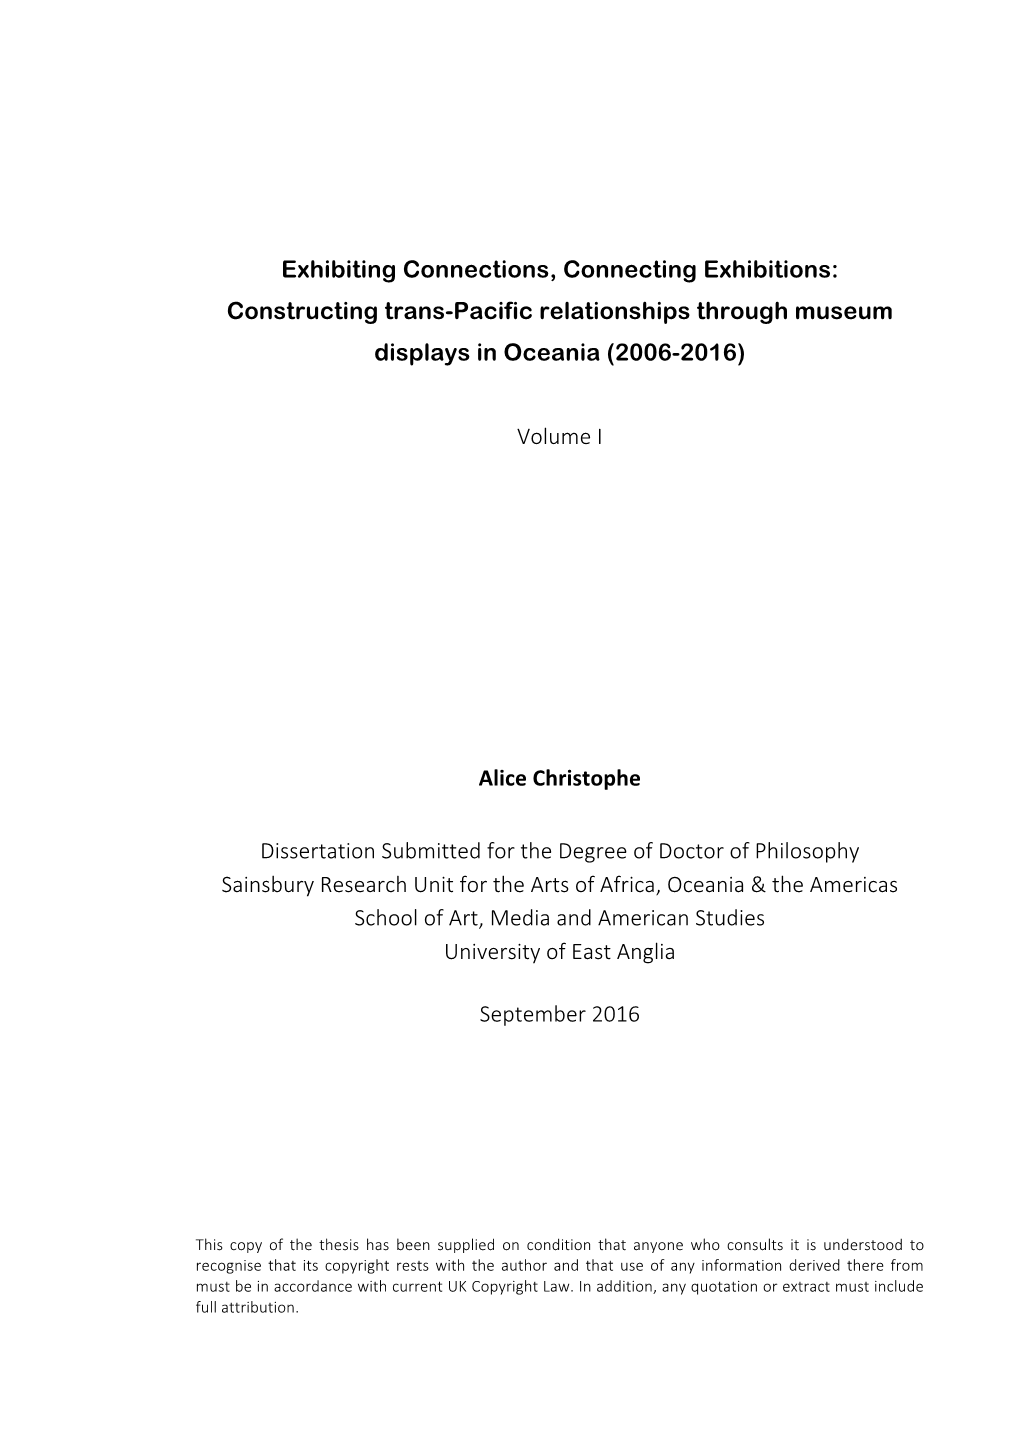 Constructing Trans-Pacific Relationships Through Museum Displays in Oceania (2006-2016)